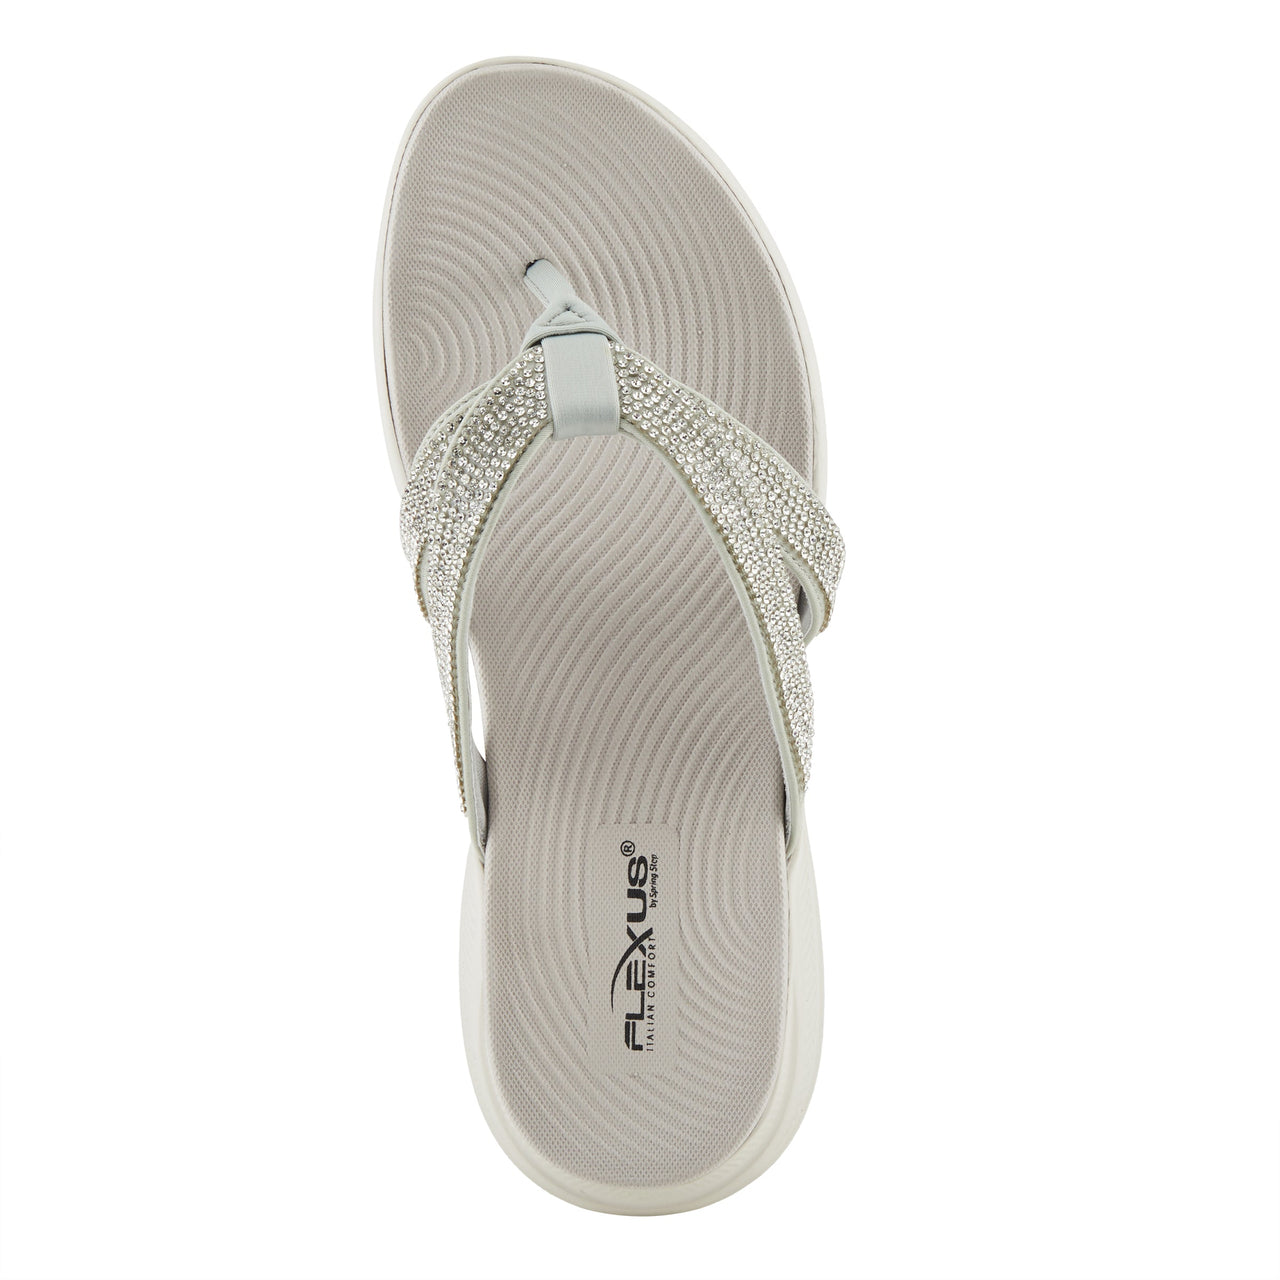 Spring Step Shoes Flexus Ashine Sandals in taupe with soft textile lining and padded insole